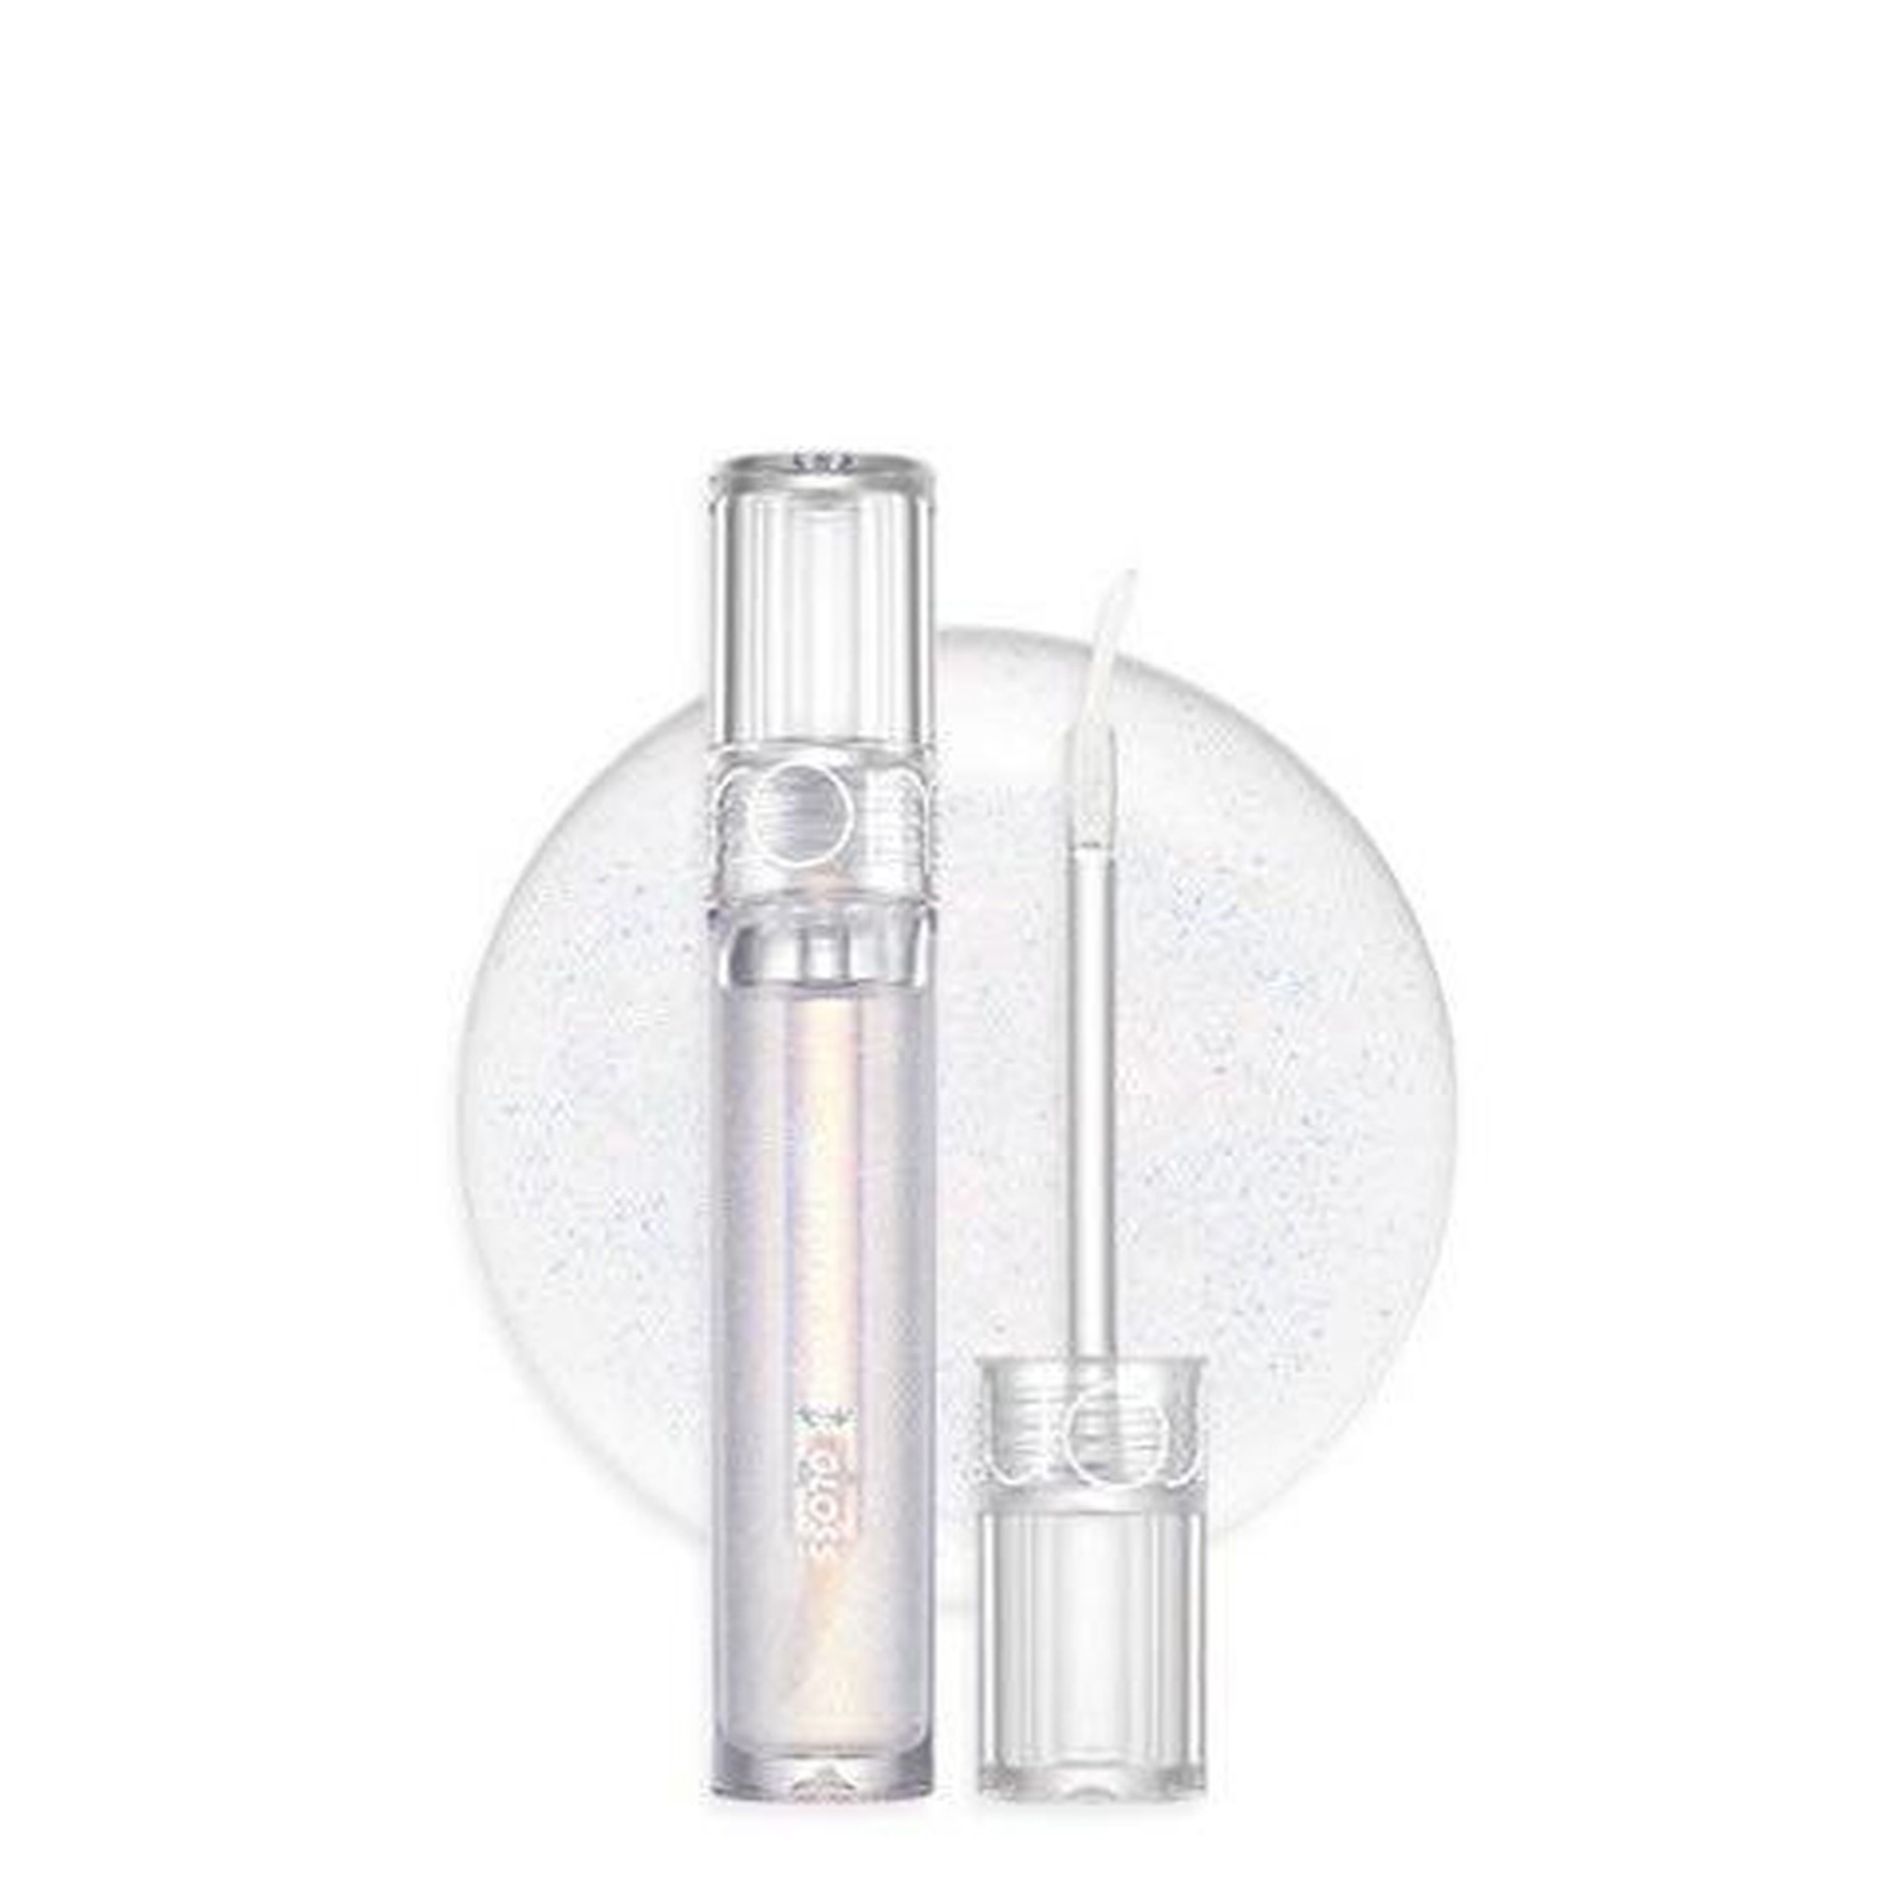 son-nuoc-bong-romand-glasting-water-gloss-4-5g-11